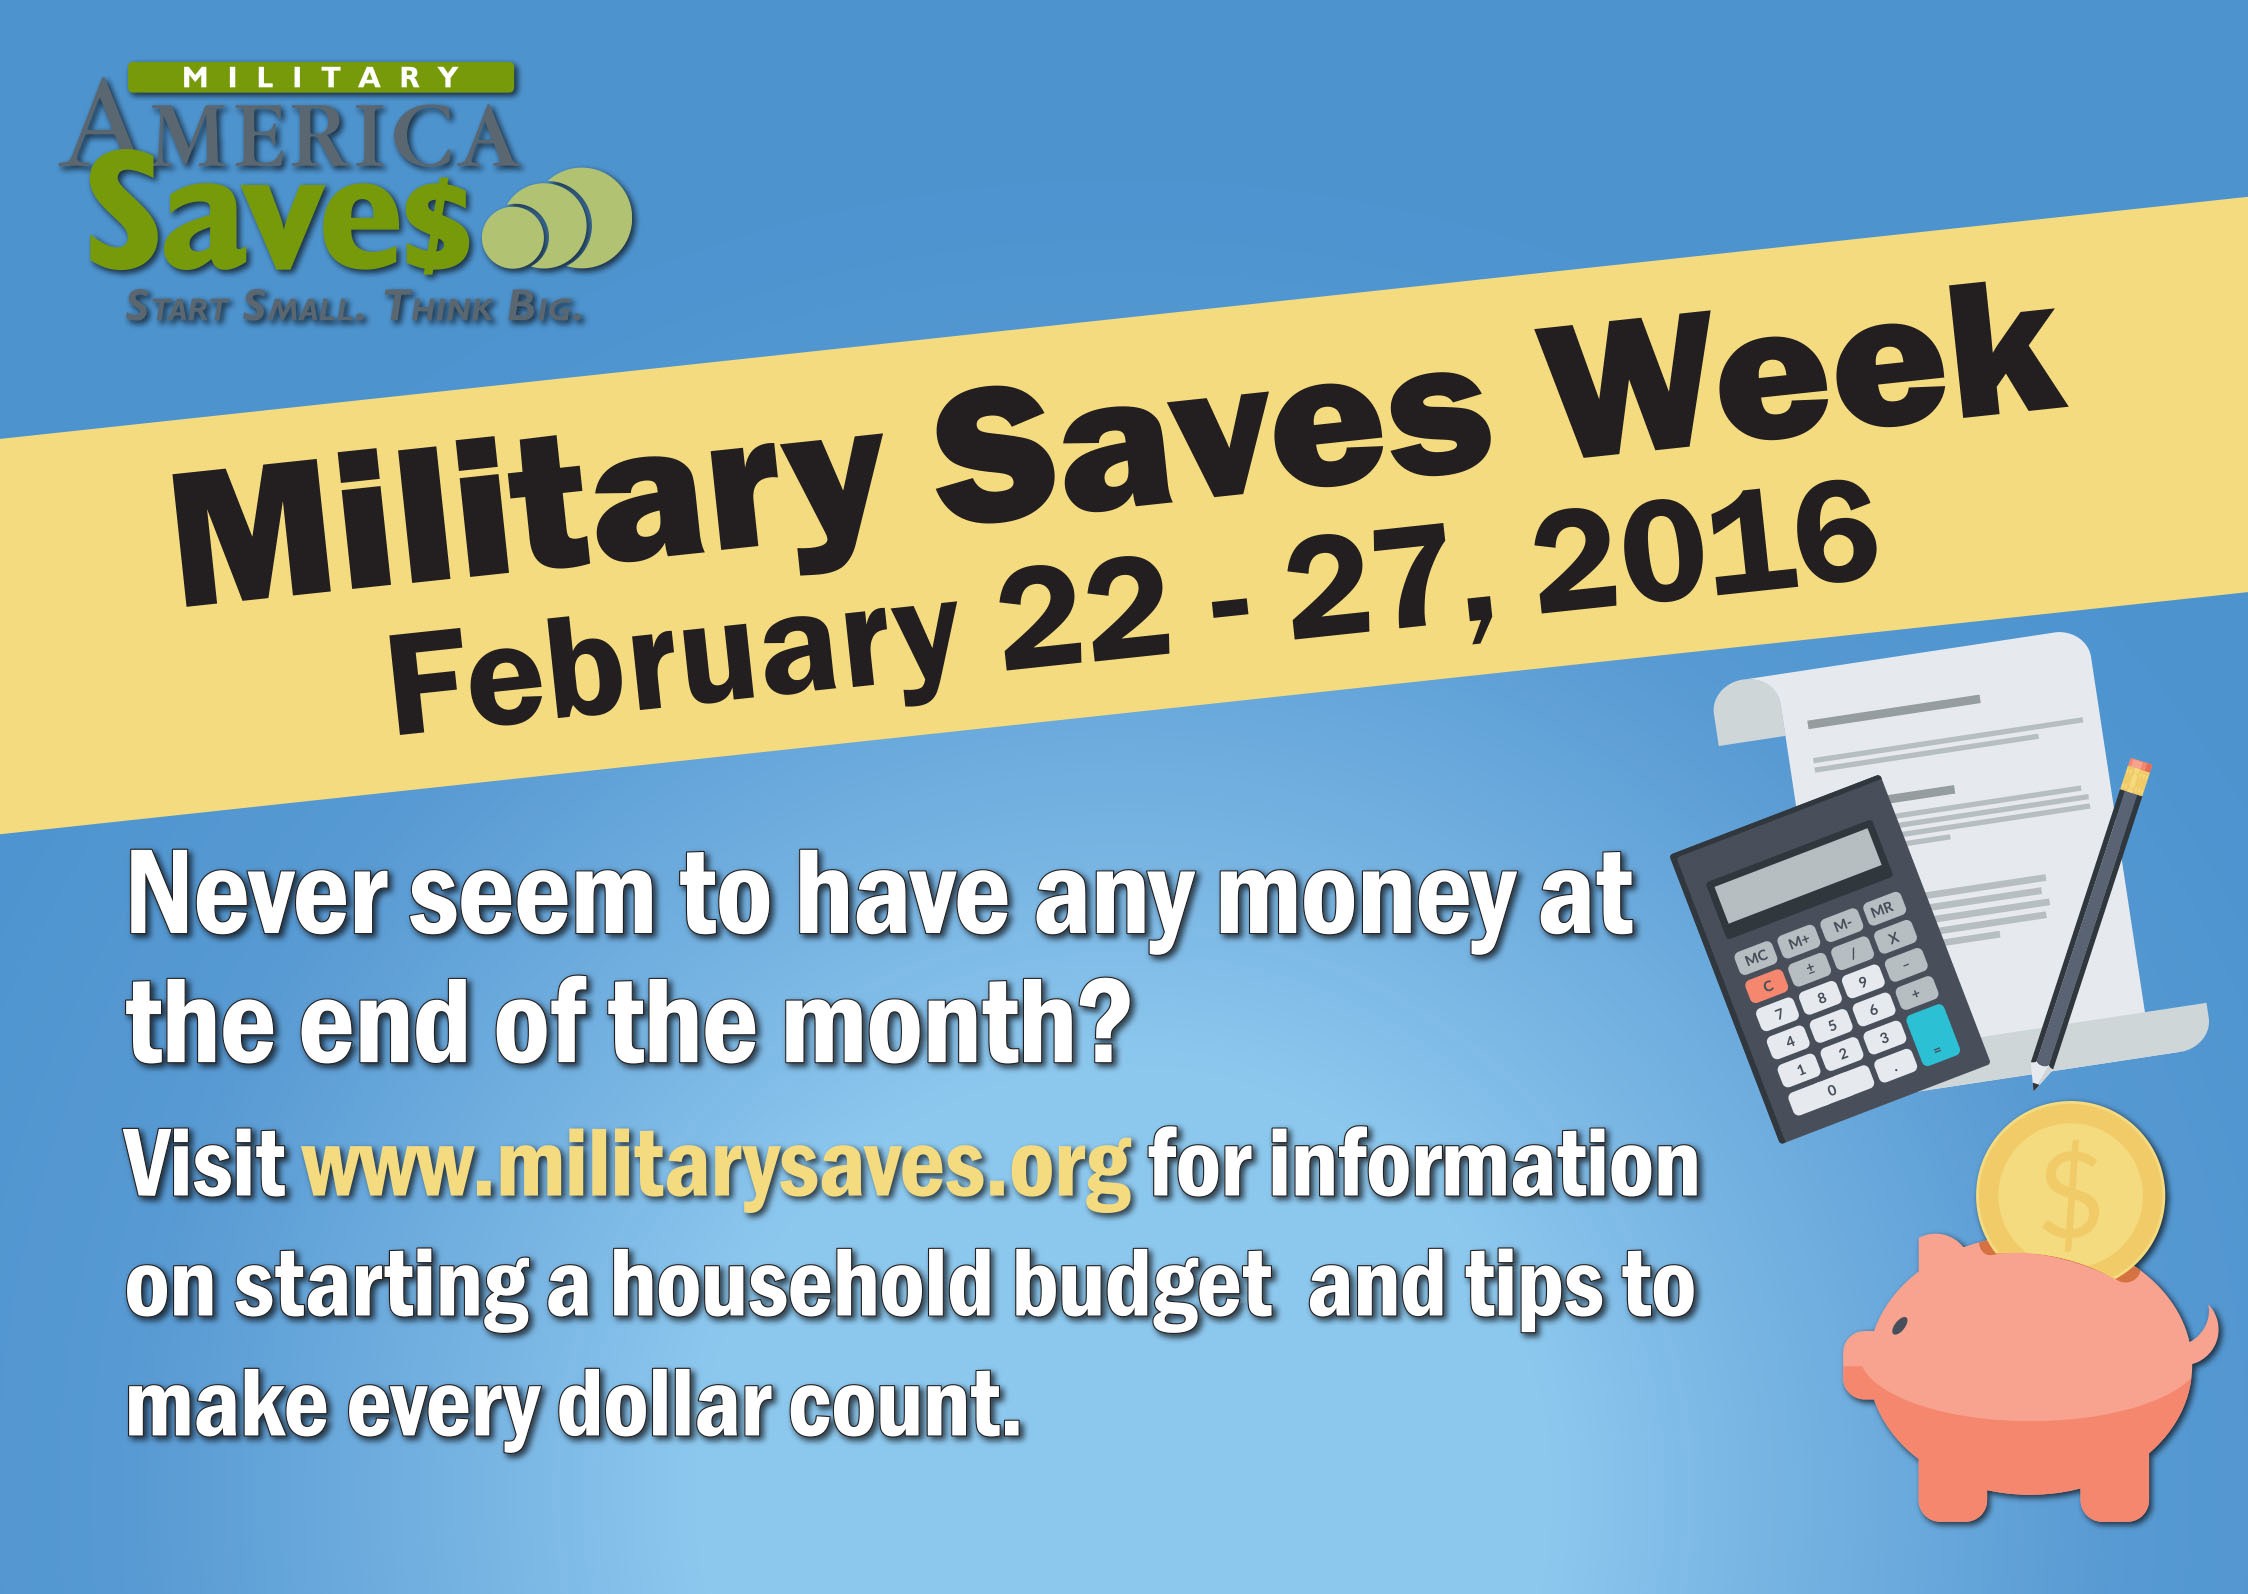 Commissaries, Military Saves Week offer ways to stretch hardearned